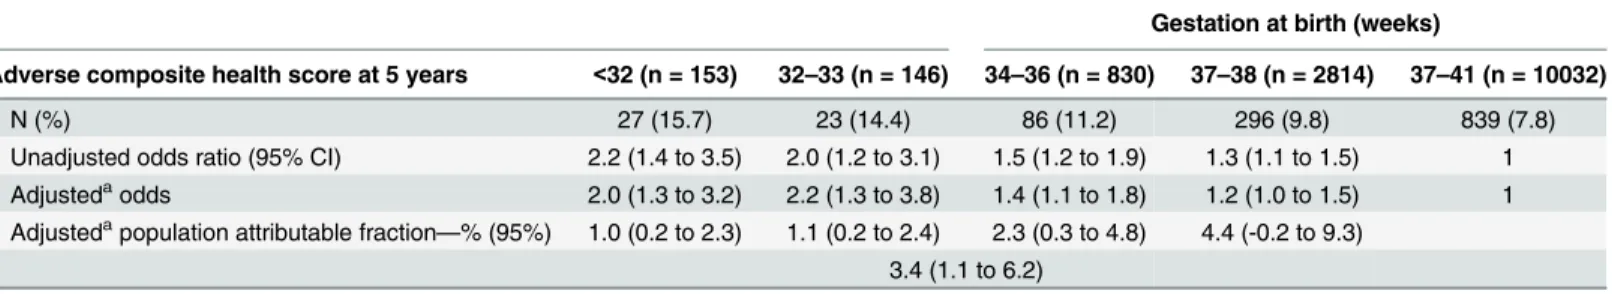 Table 5. Odds ratios of poor composite health (SDQ b Total Difficulties score  17 and/or parent rating child's health as fair or poor) compared with good composite health (SDQ score &lt; 17 and/or parent rating child's health as excellent, very good, or go